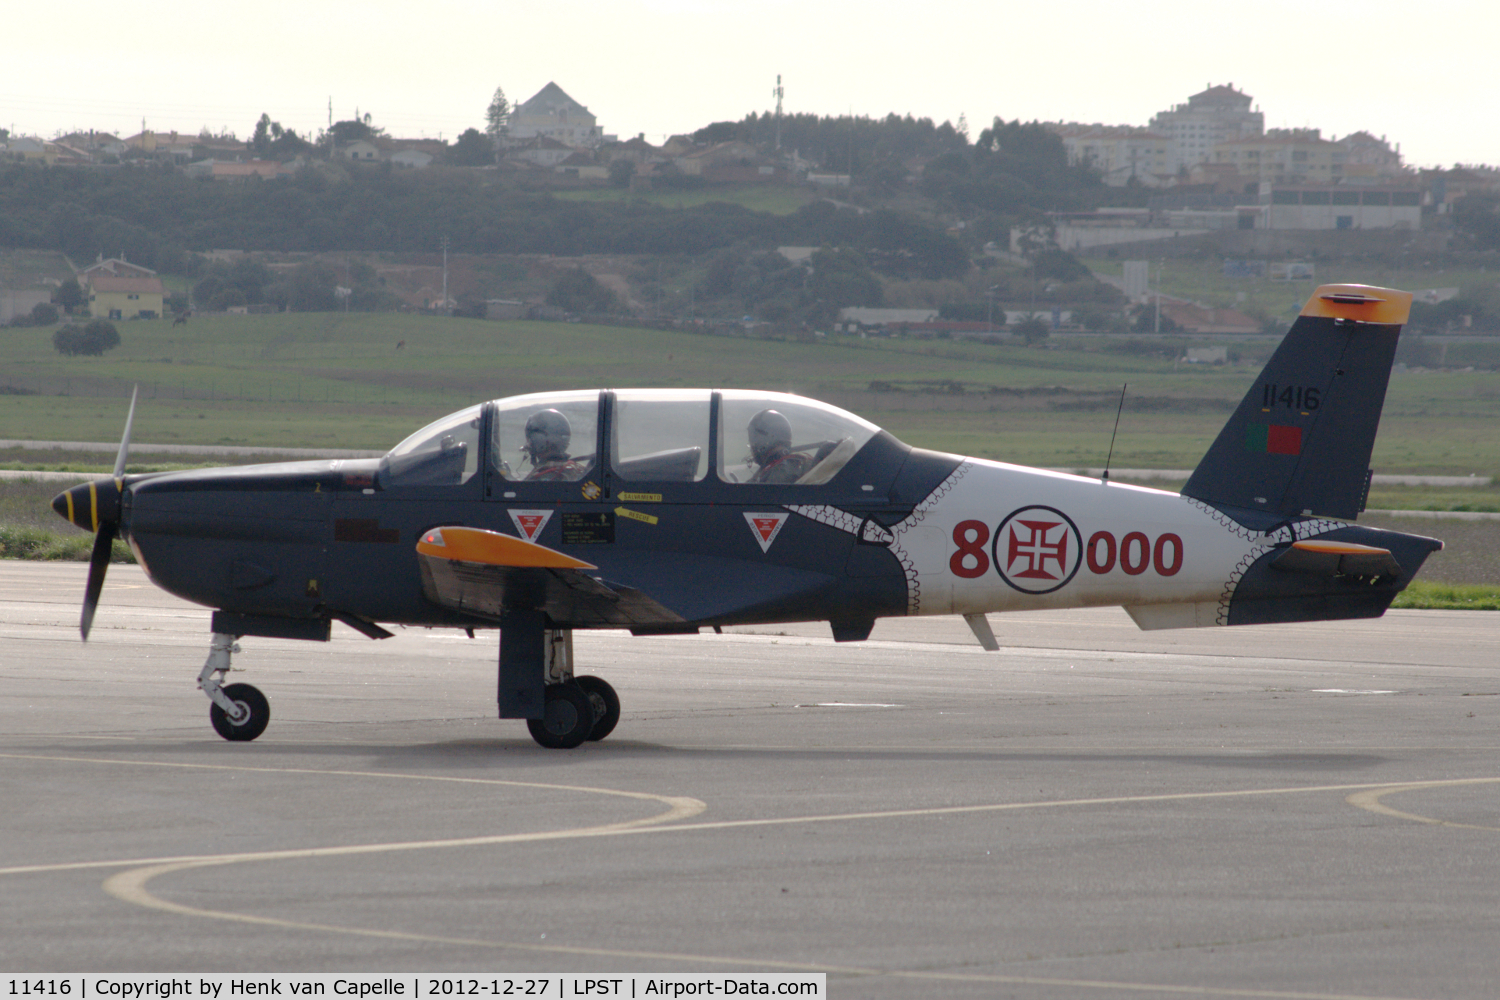 11416, Socata TB-30 Epsilon C/N 173, An Epsilon trainer of the Portuguese Air Force taxying at Sintra air force base. Note the special markings to commemorate 80000 flying hours on the TB 30.